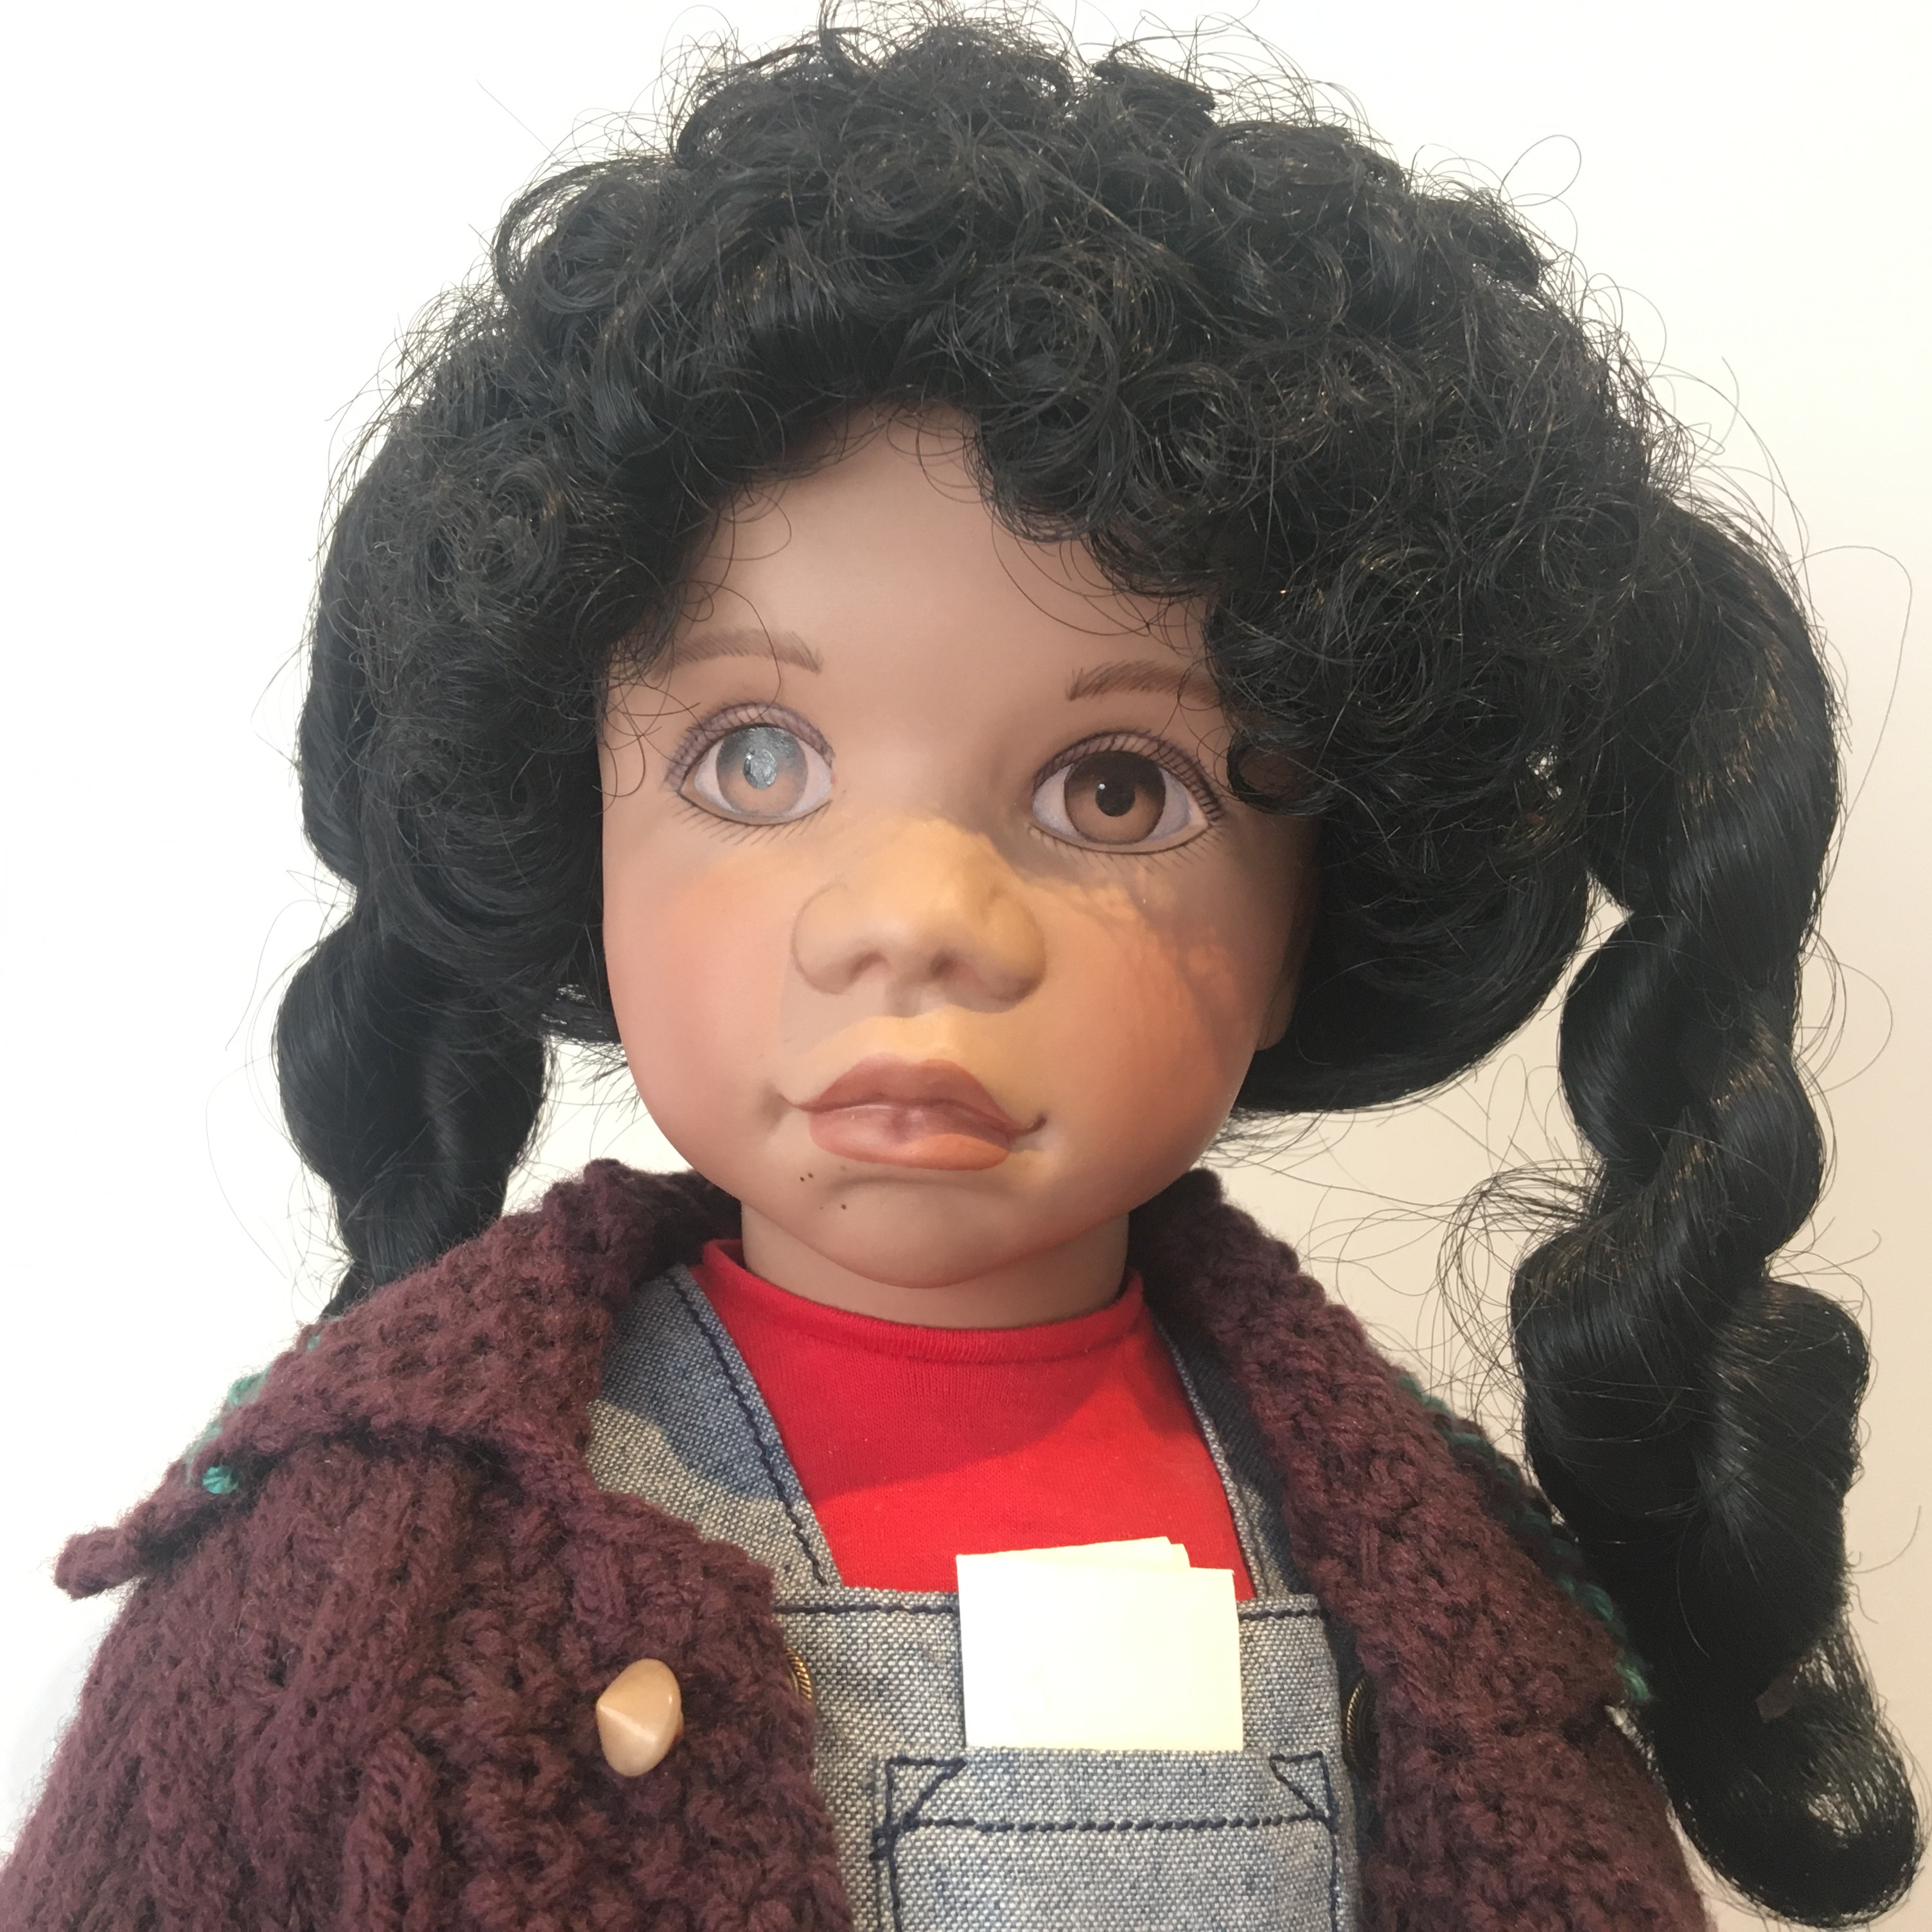 18-inch modern black Rudy doll with twisted pigtails, adorable brown sweater and denim overalls